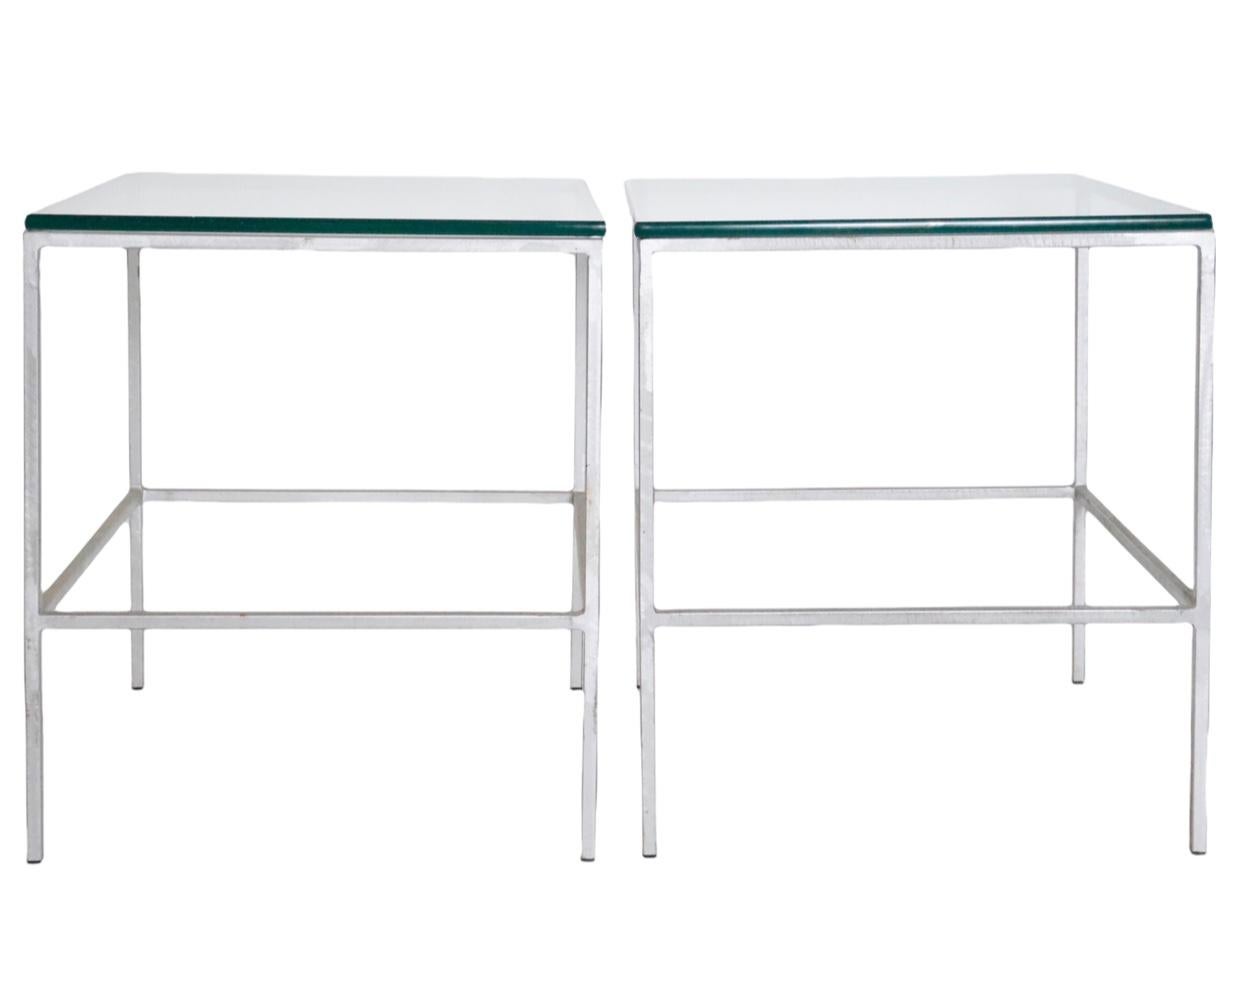 A minimalist and clean-lined pair of vintage tables with brushed metal rectangular base and.clear glass tops.

May be used as end tables or bedside tables.

USA, circa 1980.
